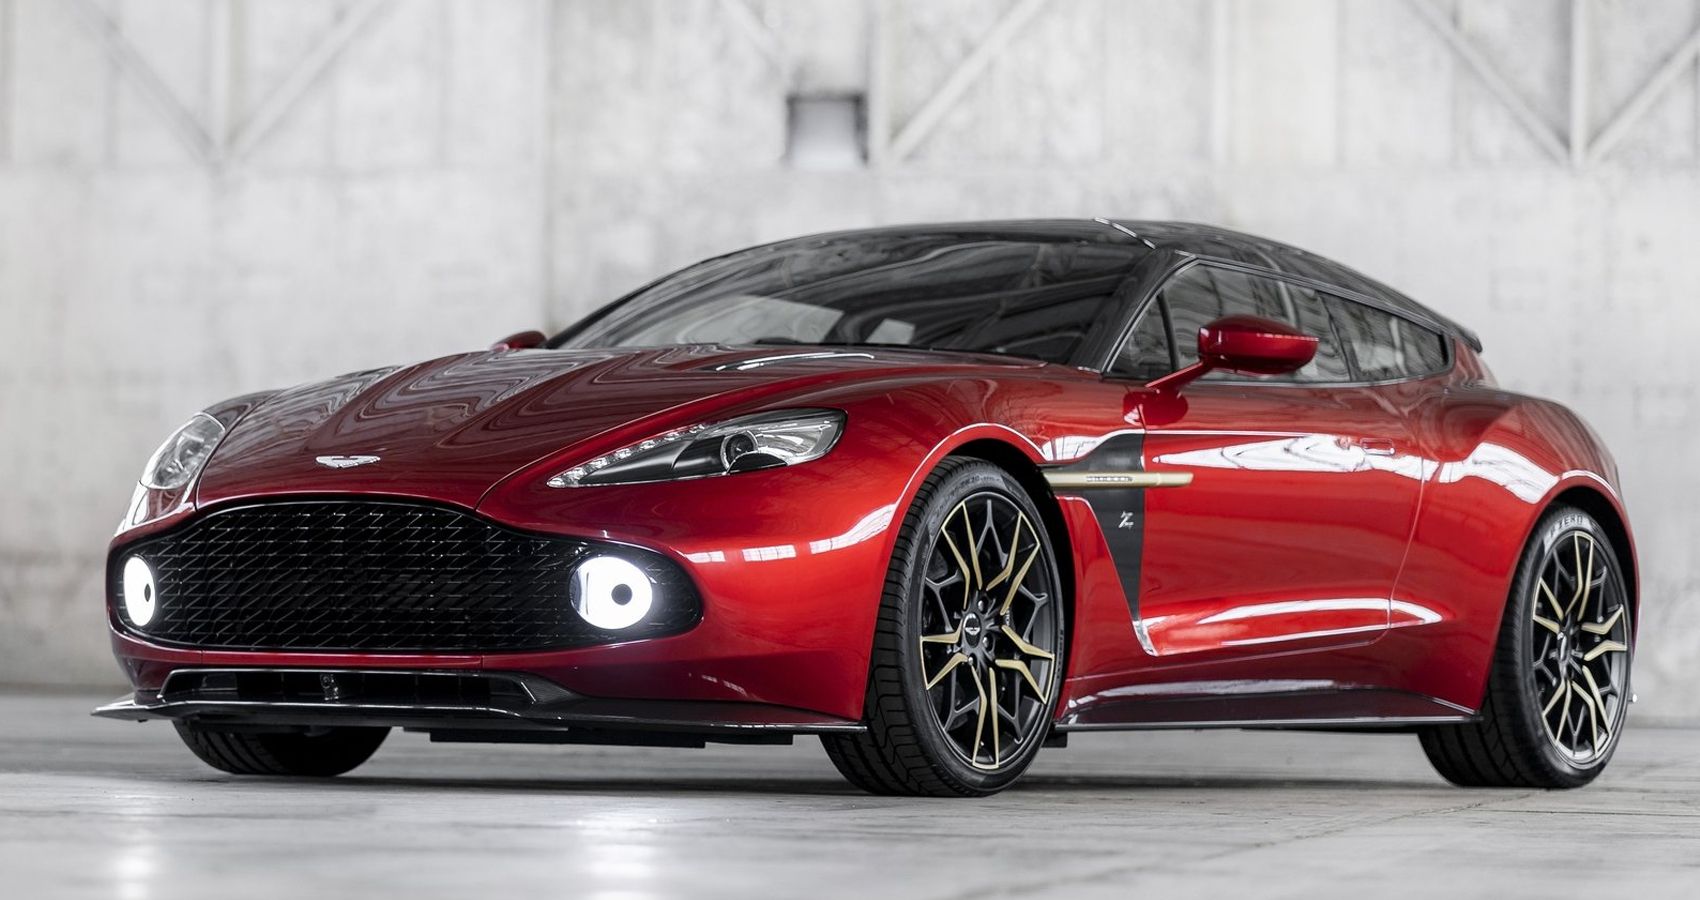 Front 3/4 view of the Vanquish Zagato Shooting Brake